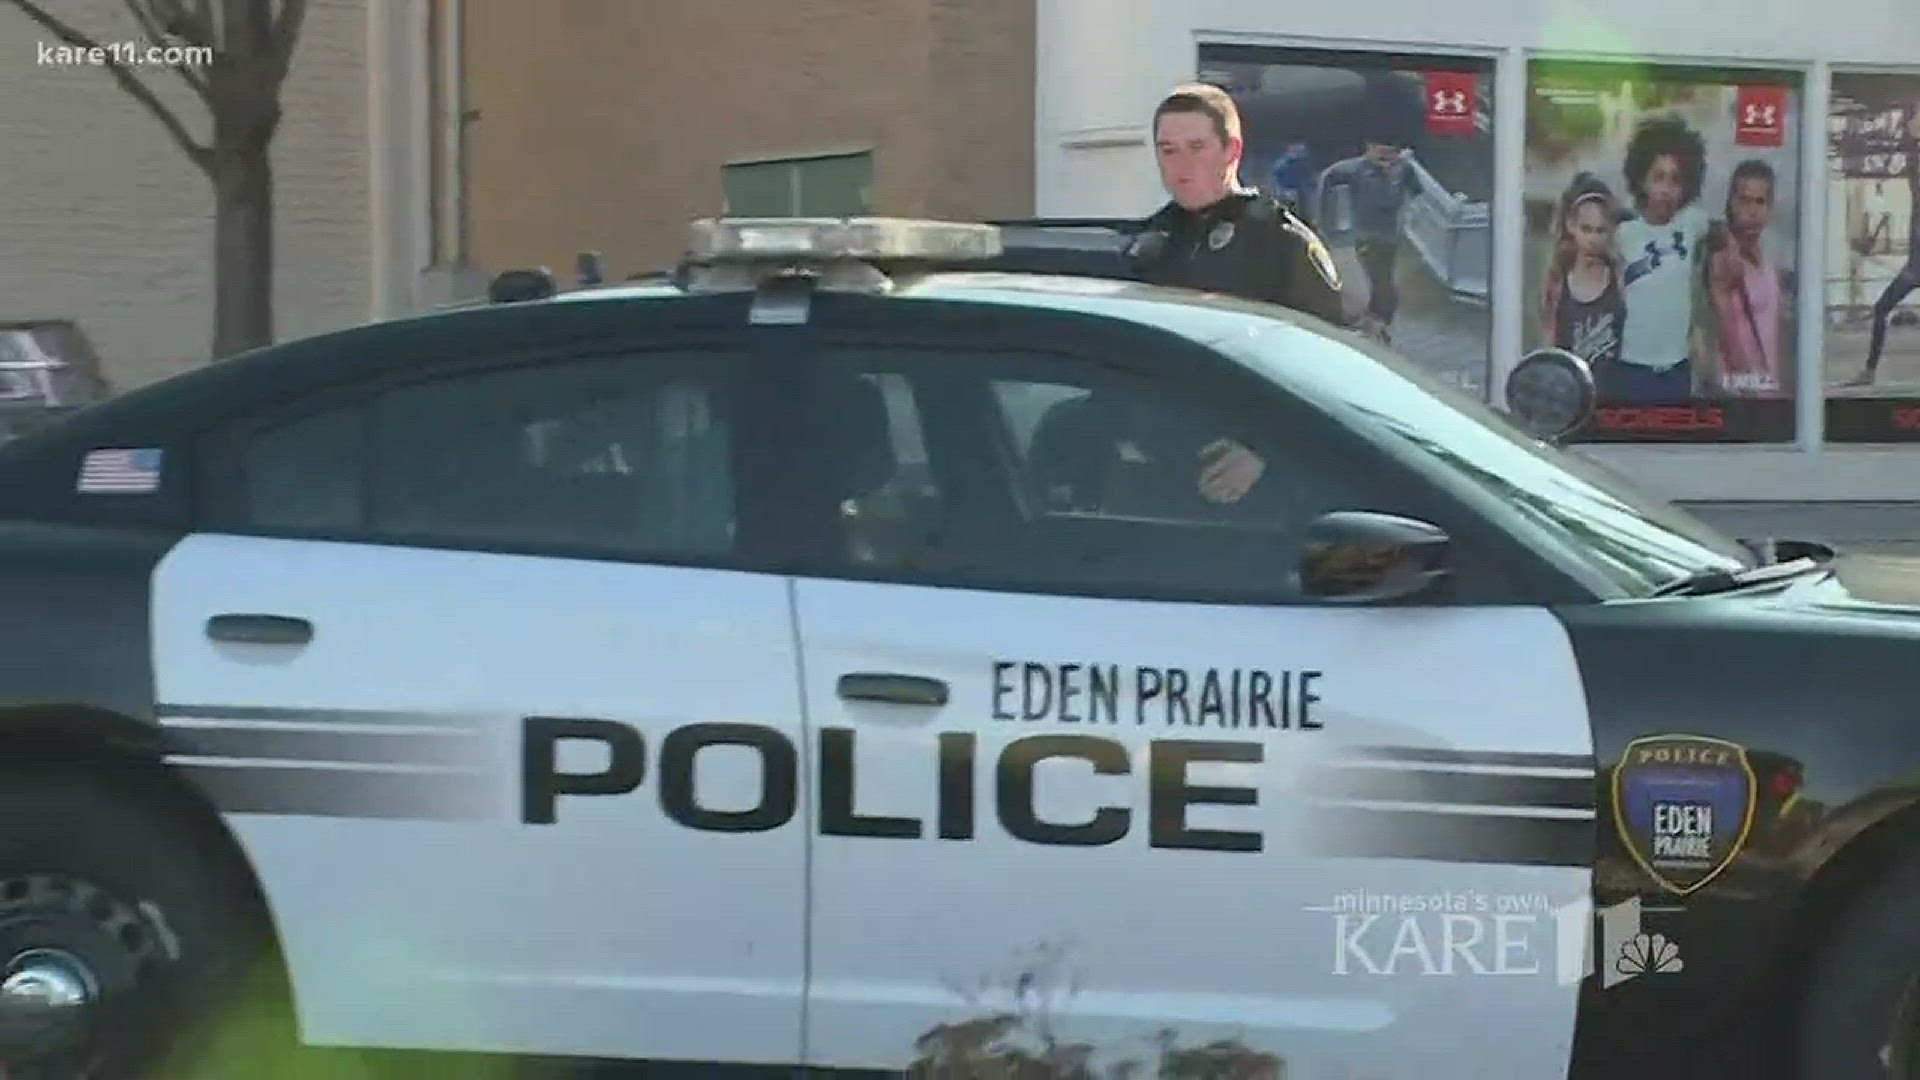 Police say a man looking to service a gun prompted a lockdown at Eden Prairie Center Tuesday afternoon. http://kare11.tv/2hIn1GT